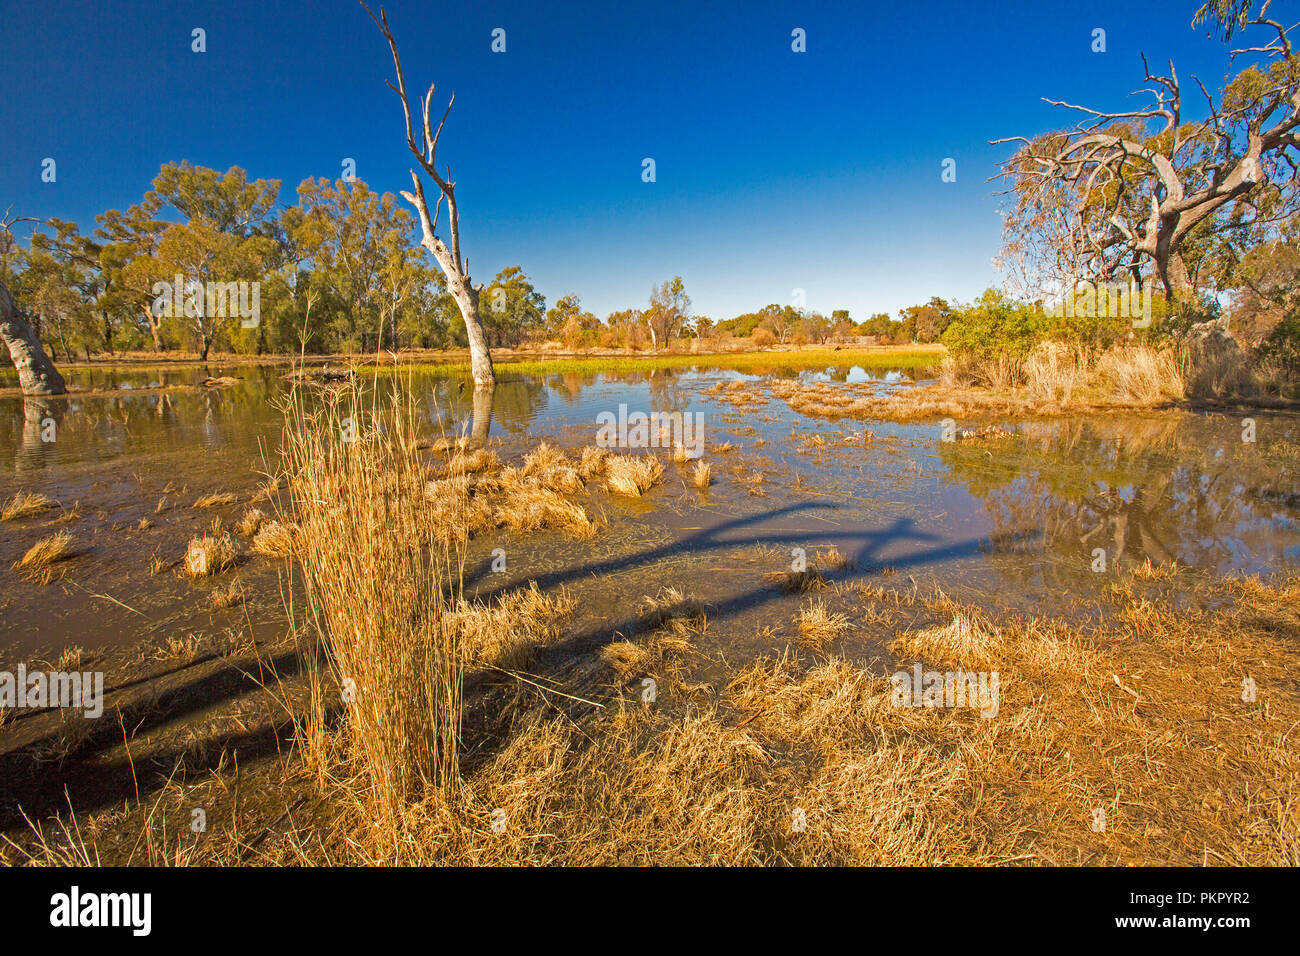 Colourful Australian landscape with golden grasses and reeds, gum trees, and blue sky reflected in calm waters of Tiger Bay wetlands at Warren NSW Stock Photo